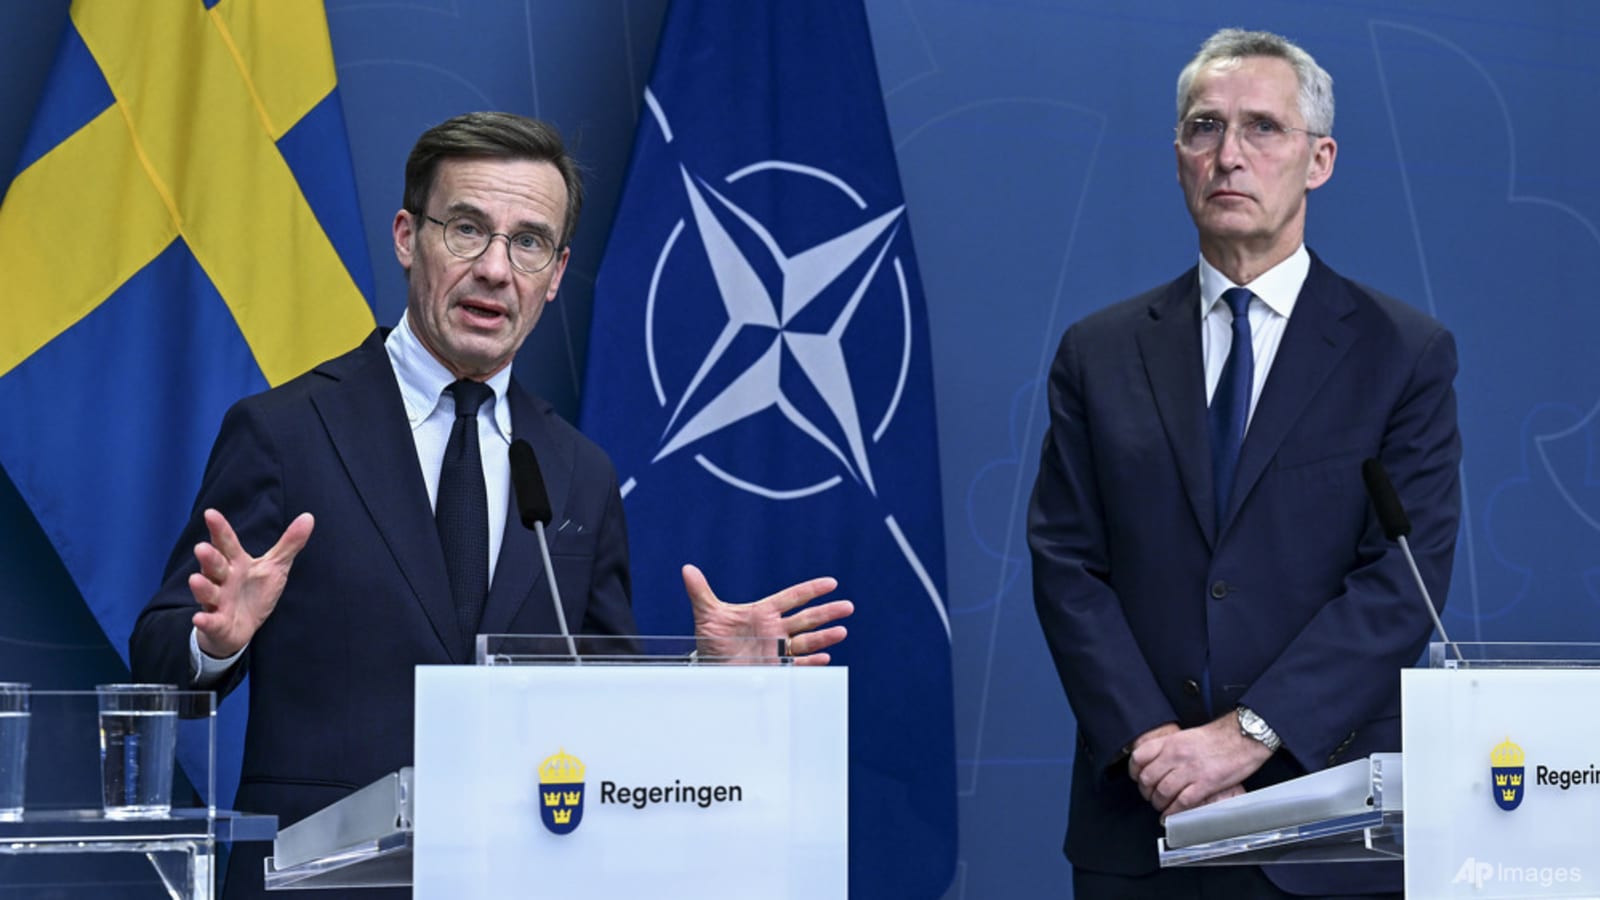 Sweden, Türkiye to hold NATO discussions 'soon', Swedish foreign ministry says